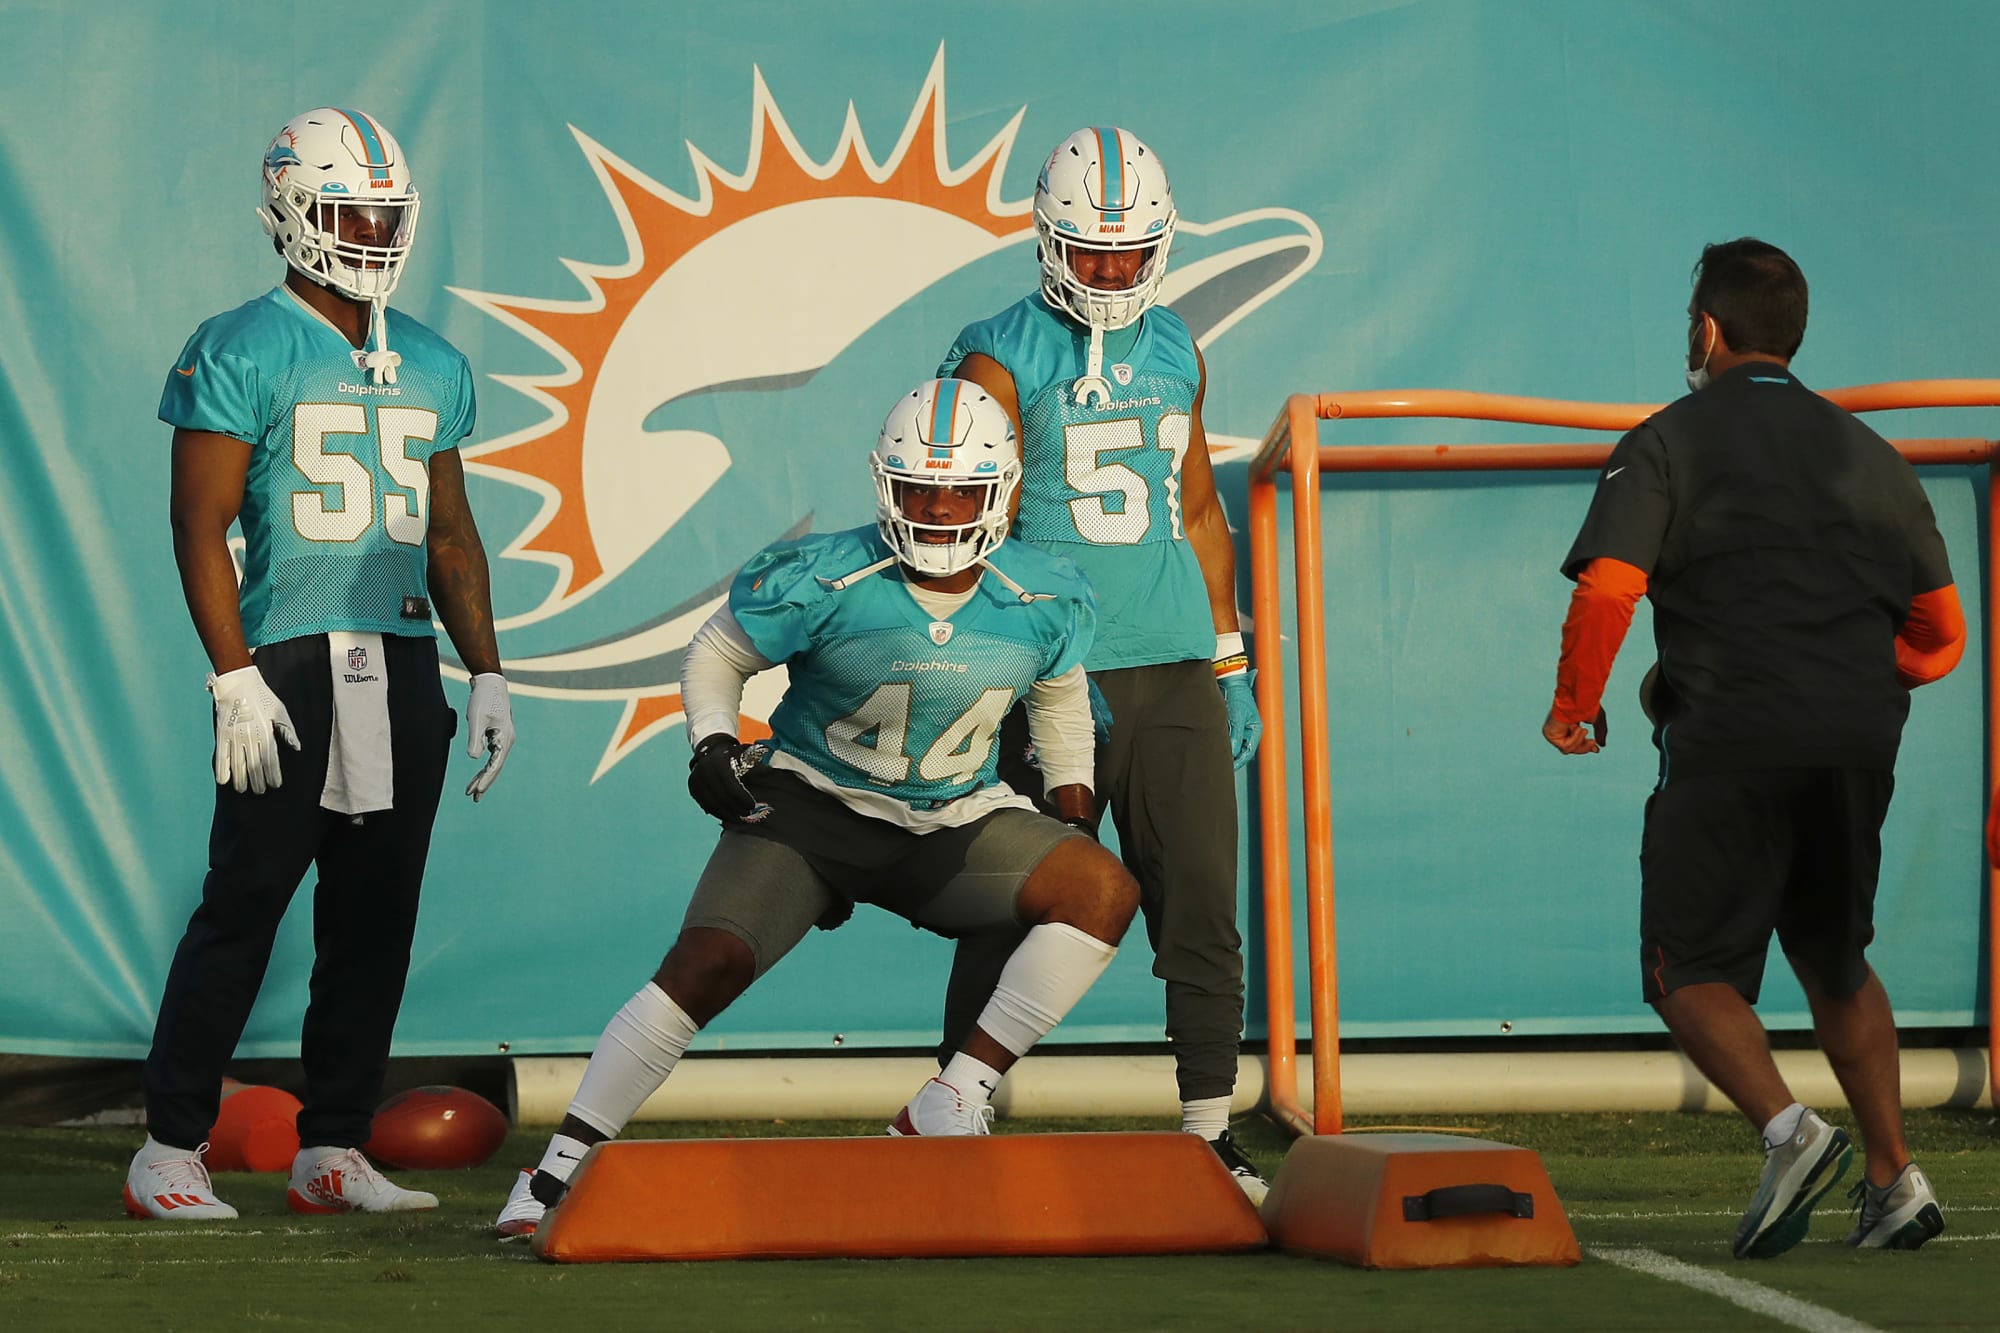 Miami Dolphins release video of the team's new practice facility